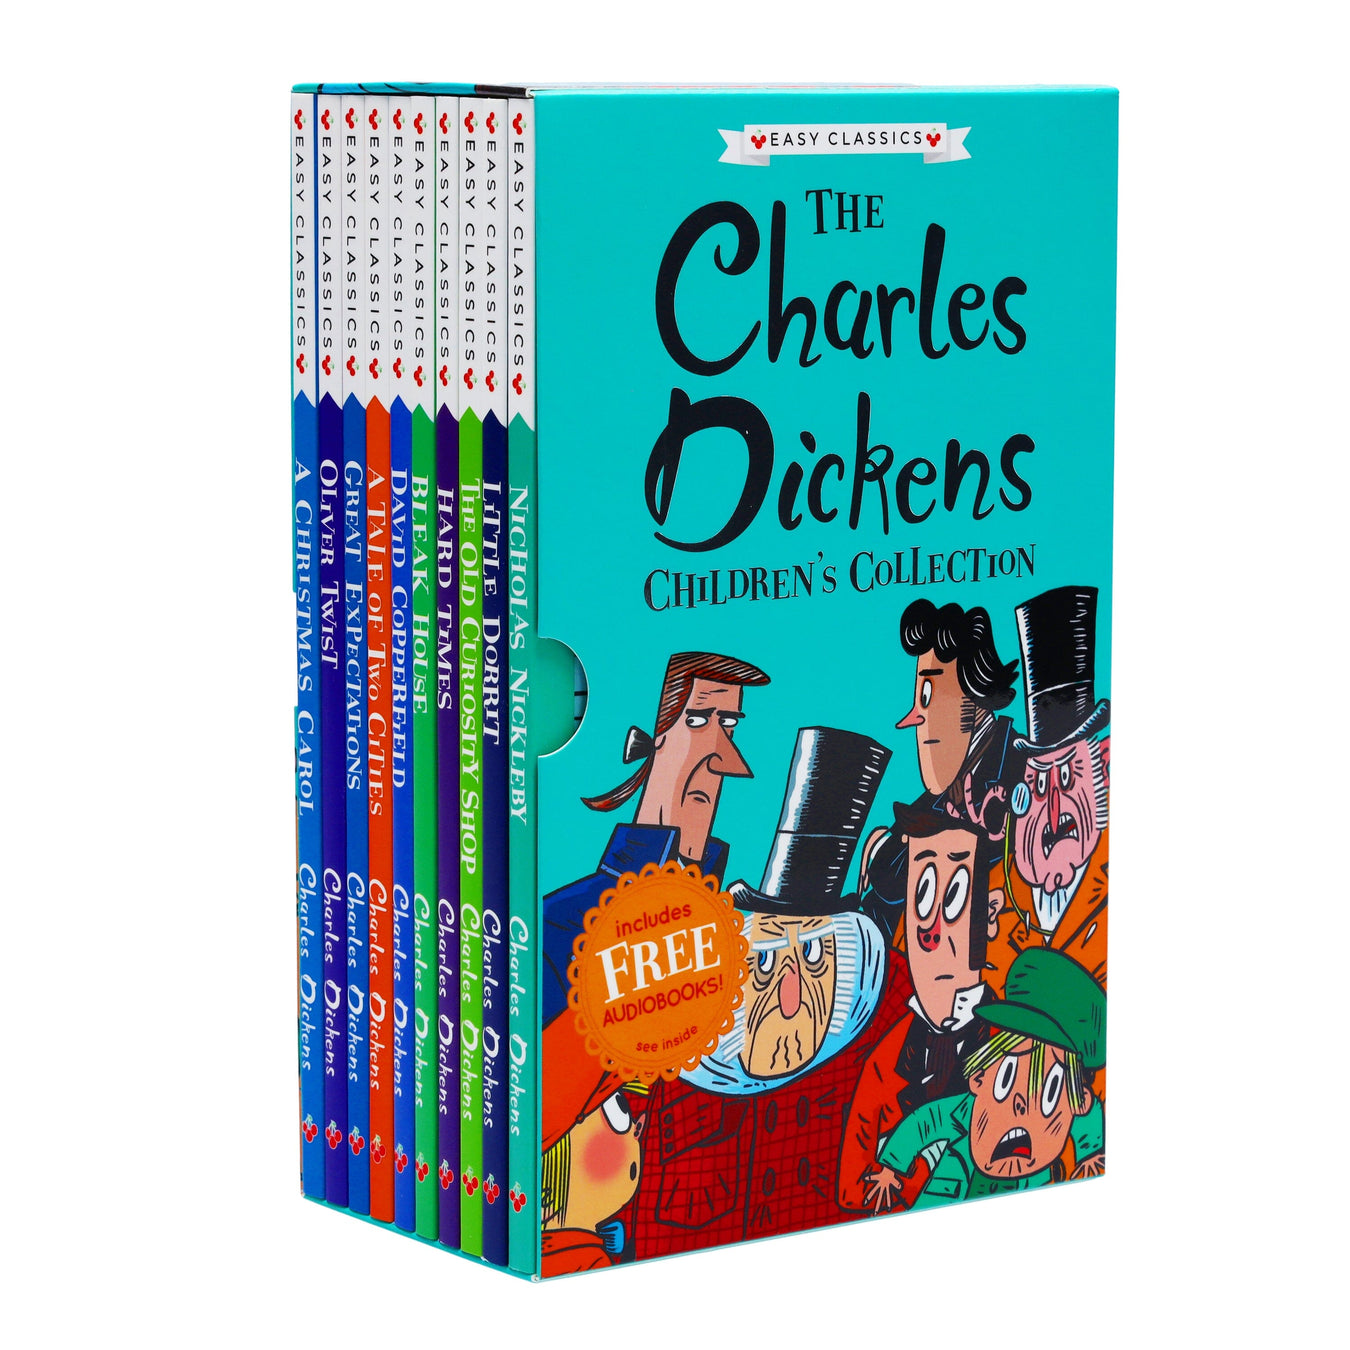 Charles Dickens Books